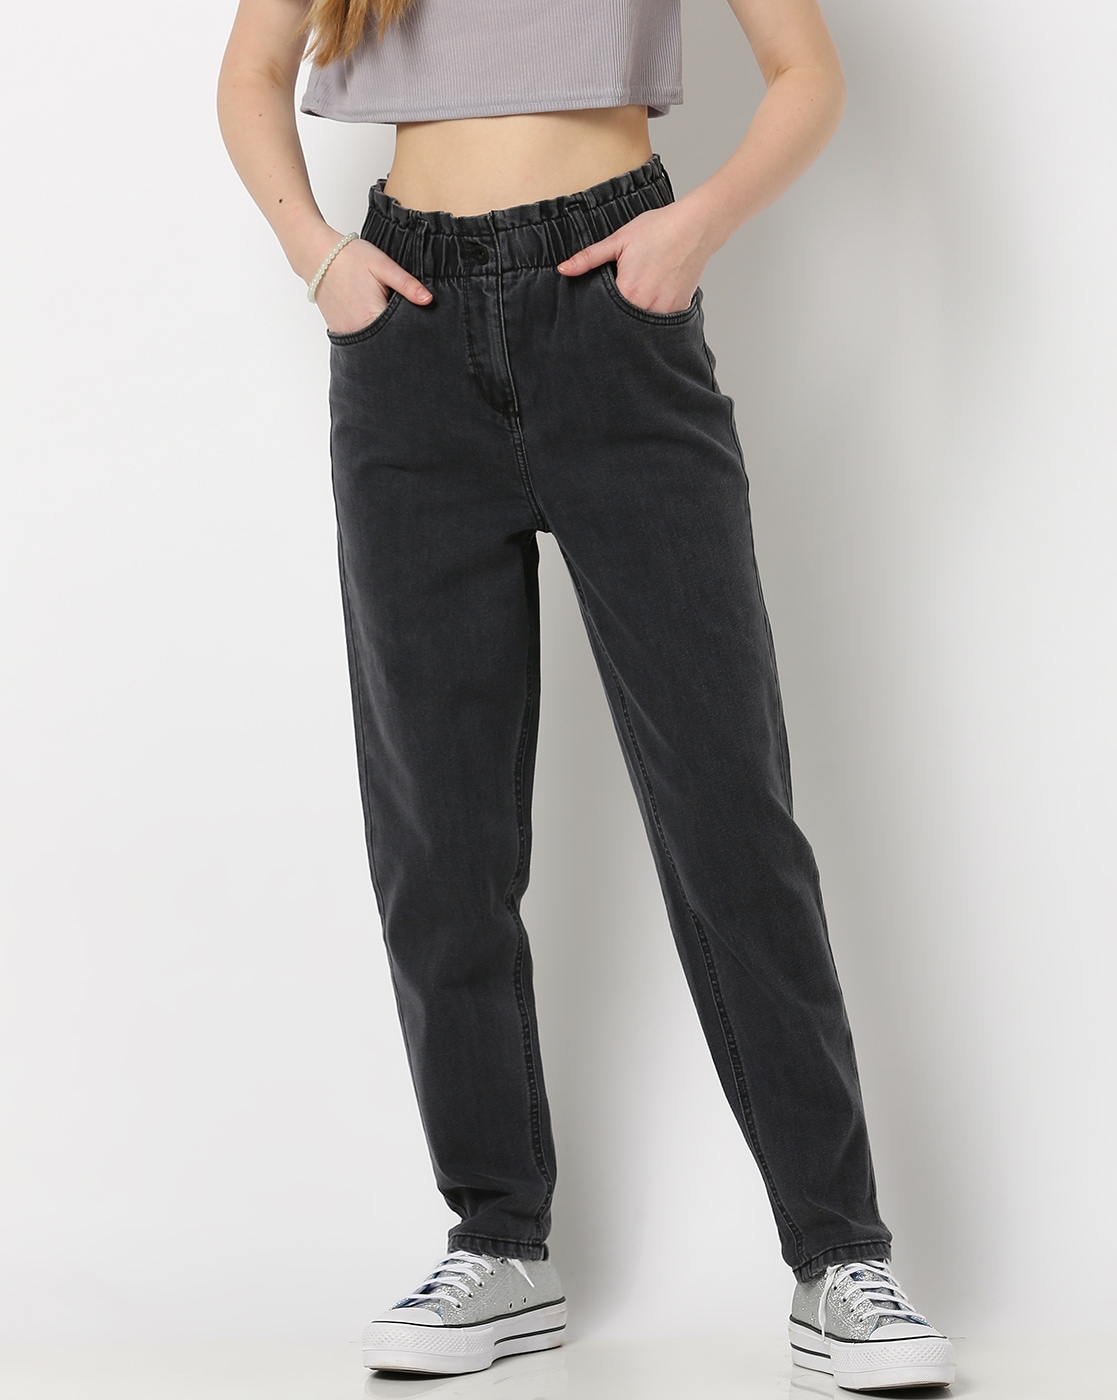 MOM JEAN S'OLIVER RELAXED FIT :Tapered leg | Original Jean Shop